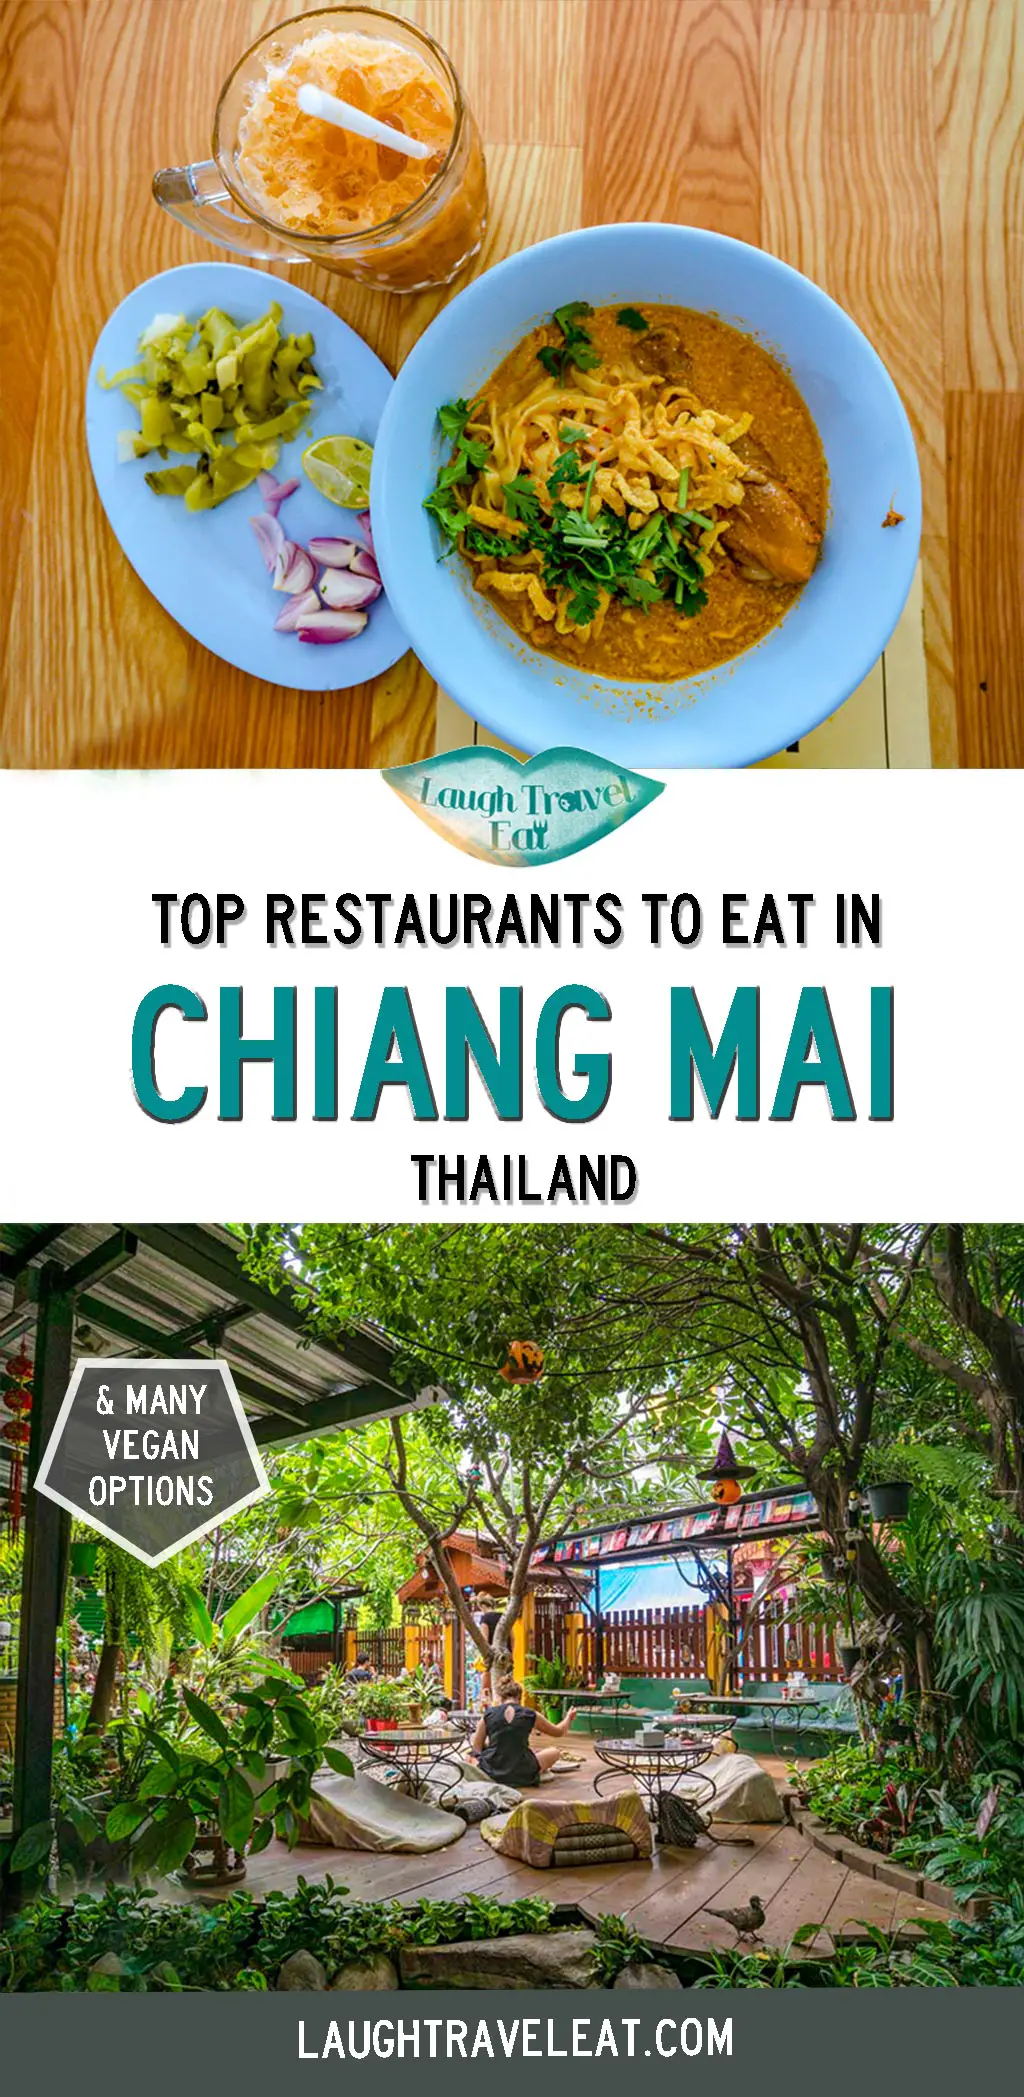 Chiang Mai is the jewel of northern Thailand and the restaurant choices are top notch. As a favourite hangout of digital nomads, you are spoiled for choices from Thai food to the best vegan restaurants. I have visited Chiang Mai as a tourist and lived there as a DN, so I thought it’s high time I write down a list of all my favourite eateries so I can compile my recommendations in one place. #ChiangMai #Thailand #Thaifood #restaurants